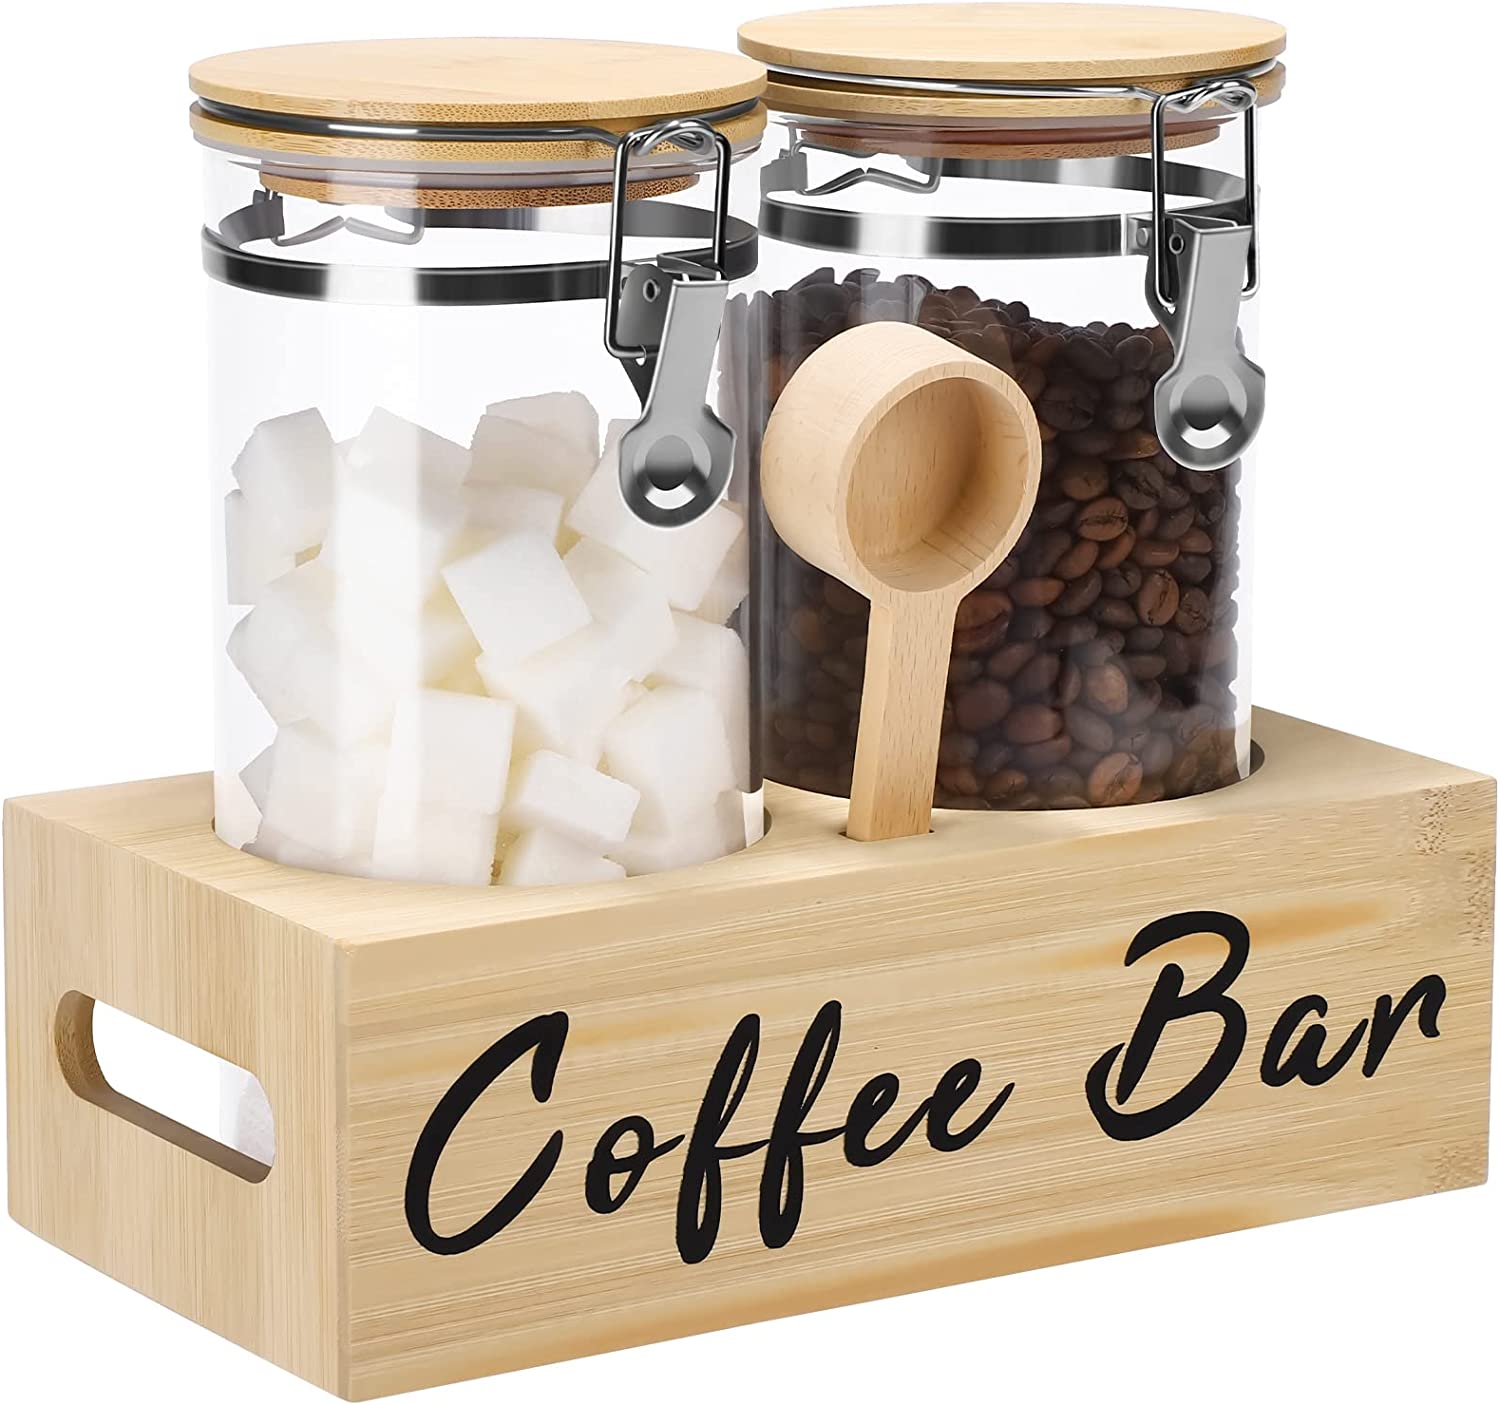 coffee-basket-ideas-cansiter